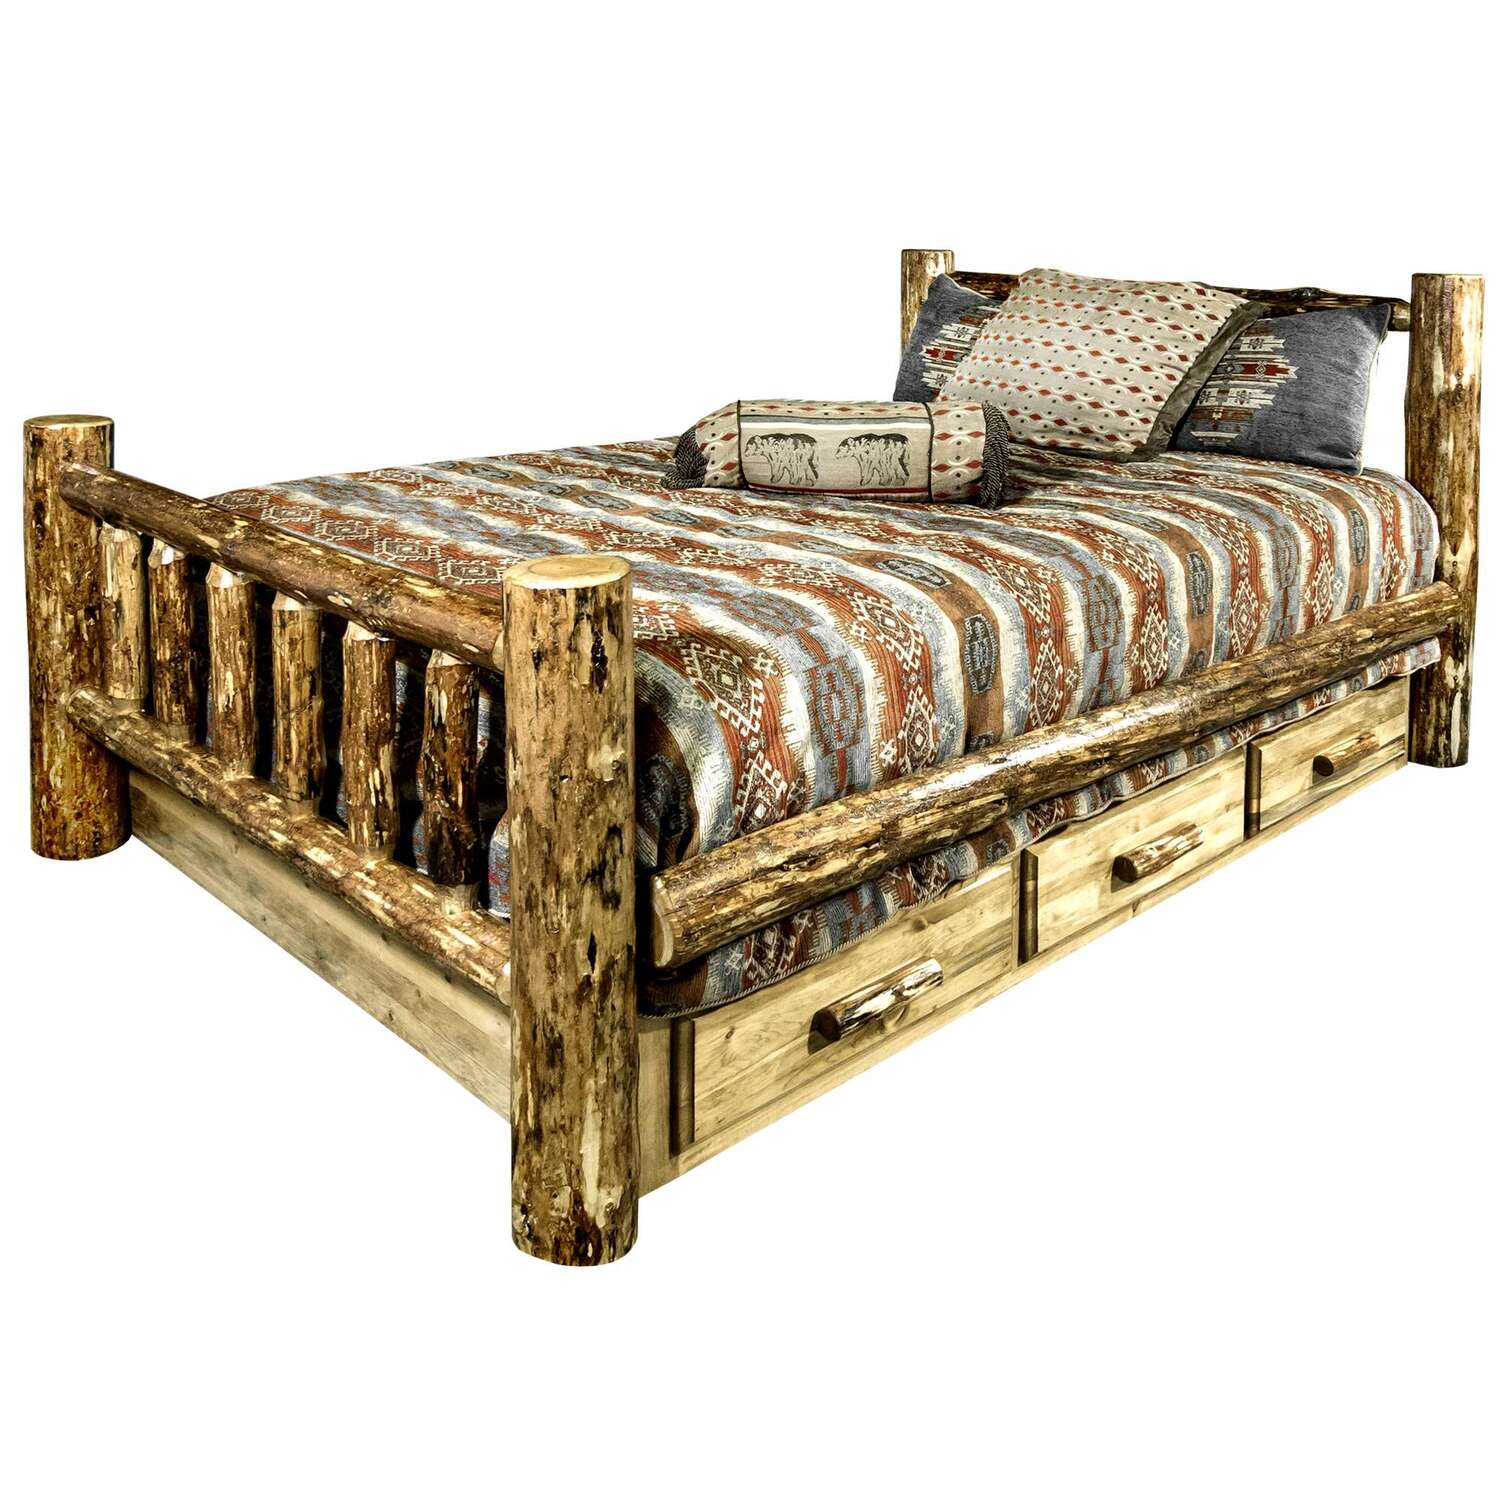 Glacier Country Collection California King Bed w/ Storage - image 3 of 5